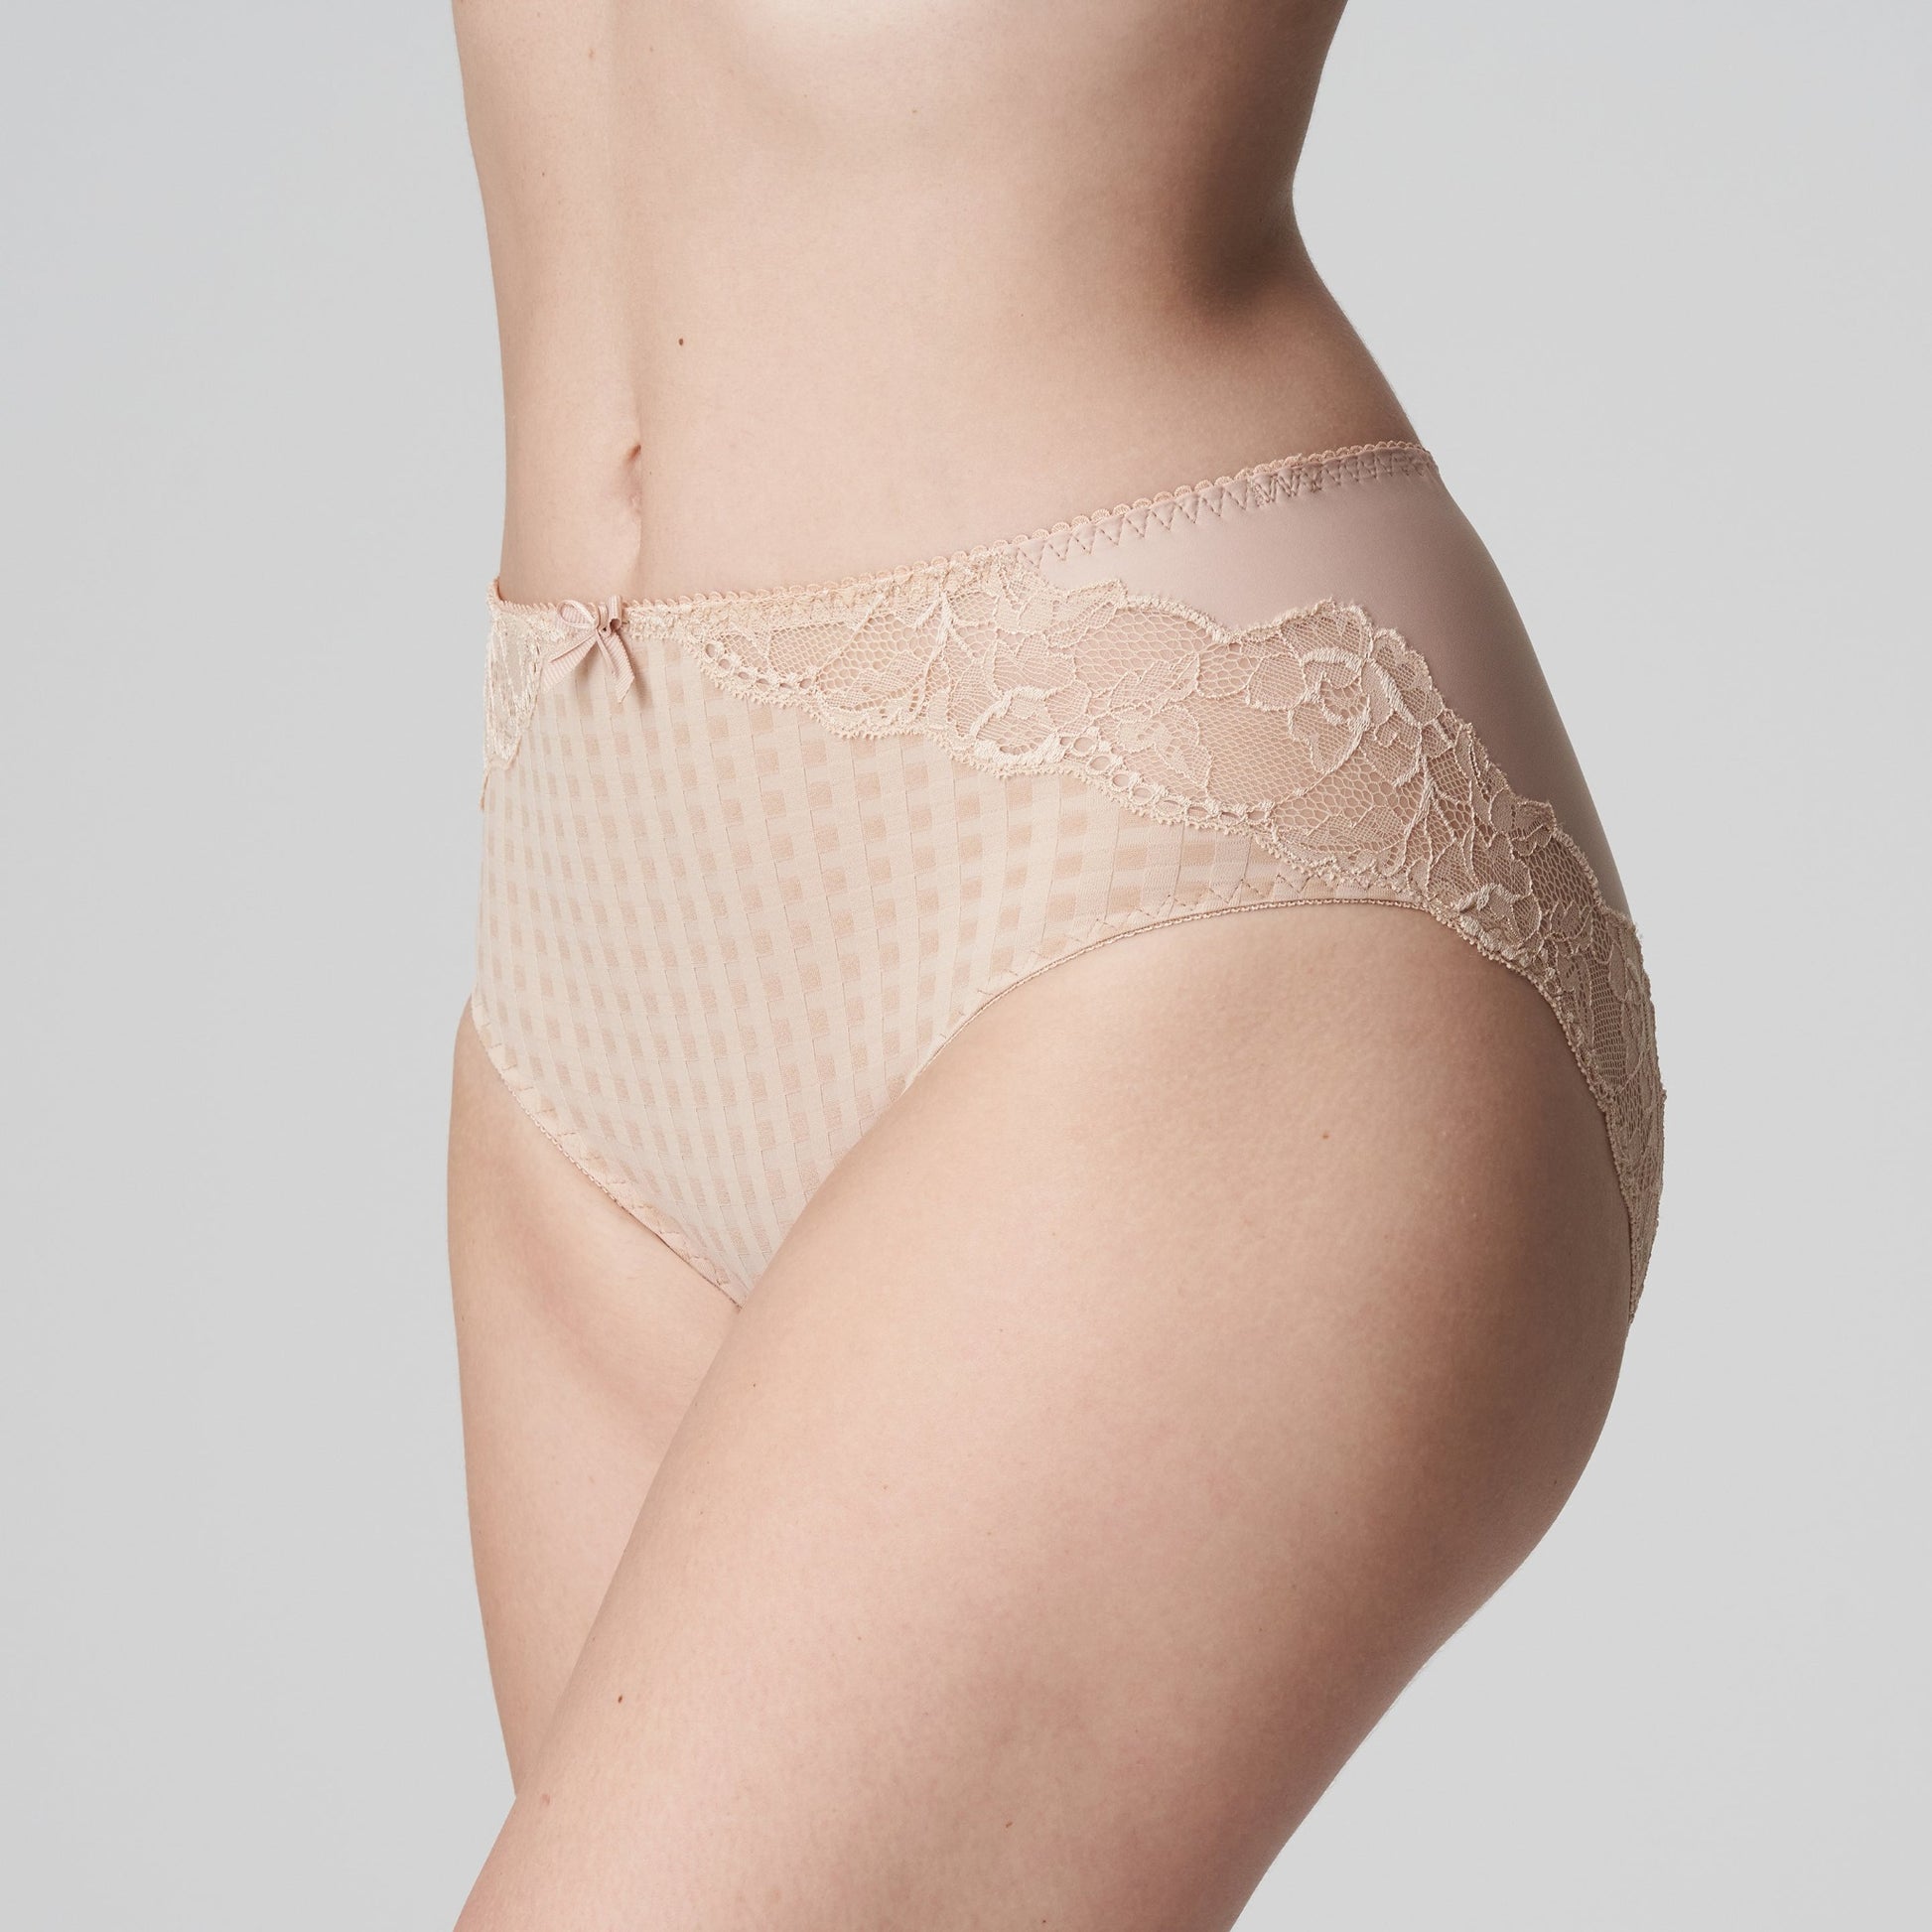 Side view of a woman wearing the Madison Full Brief panty with lace in Caffe Latte by PrimaDonna.